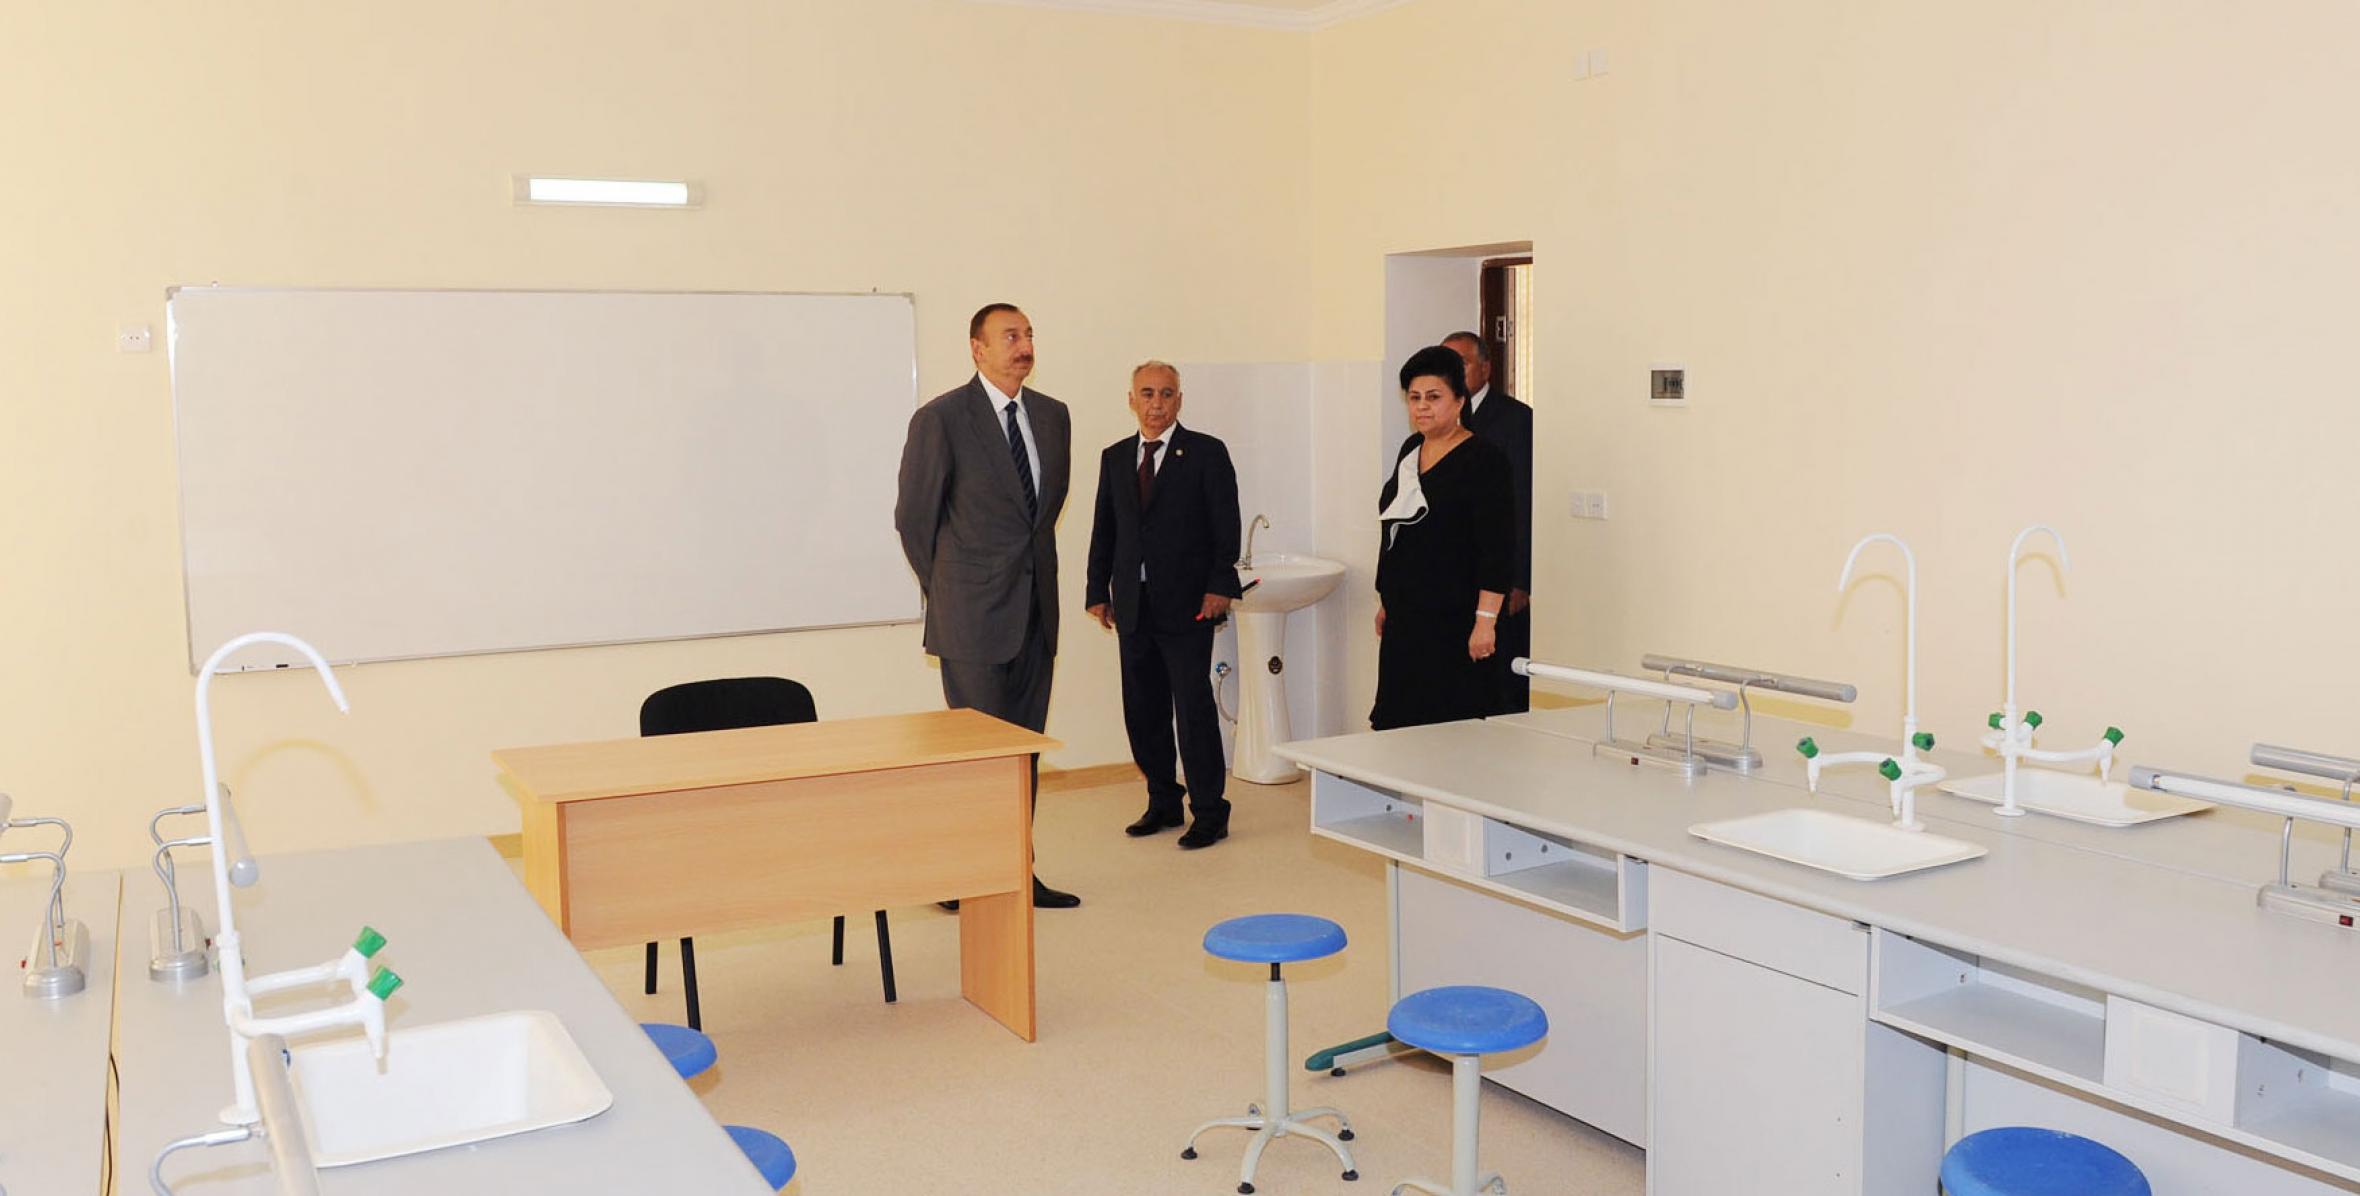 Ilham Aliyev examined secondary schools in the Sabunchu, Nizami, Surakhani, Nasimi and Garadag districts after major overhaul and reconstruction